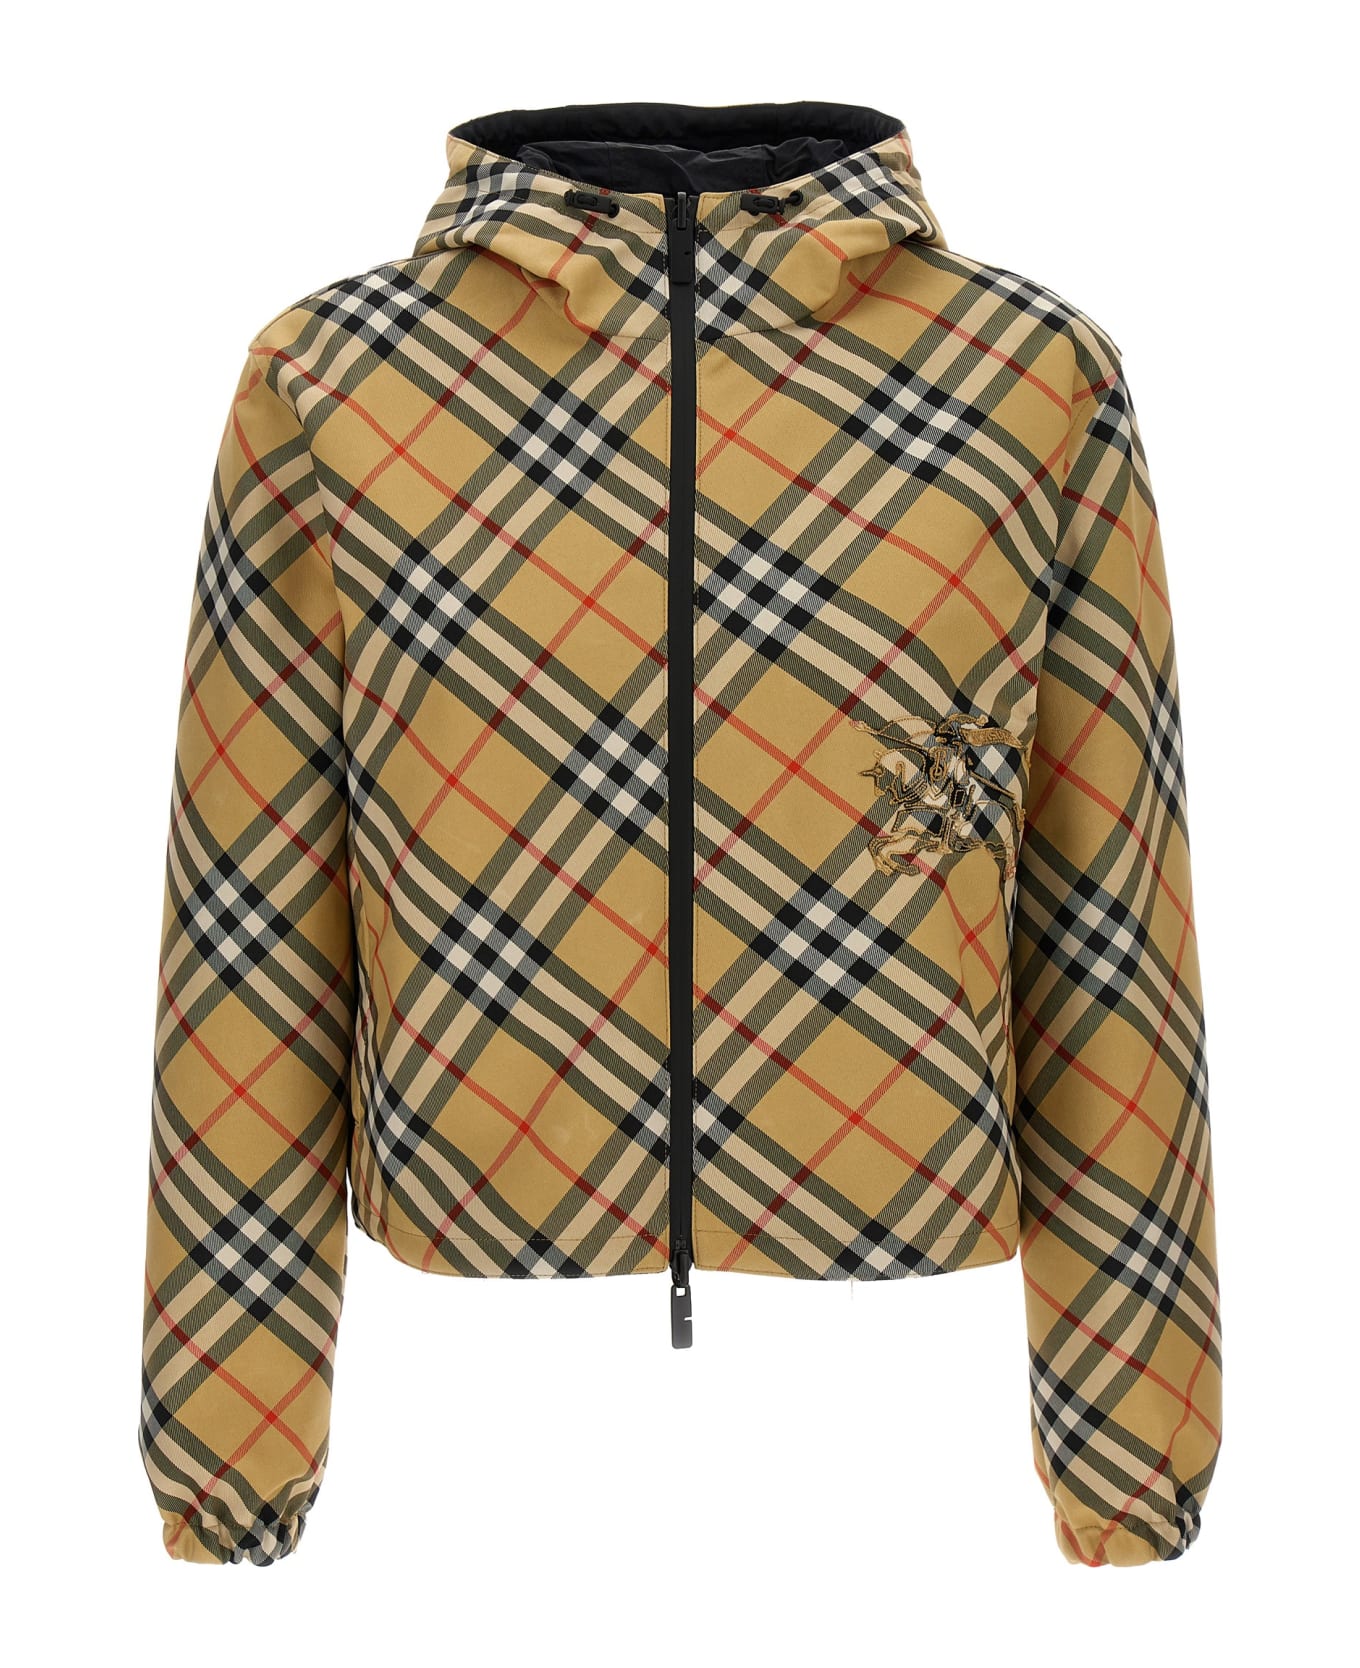 Burberry Cropped Check Reversible Jacket - Beige